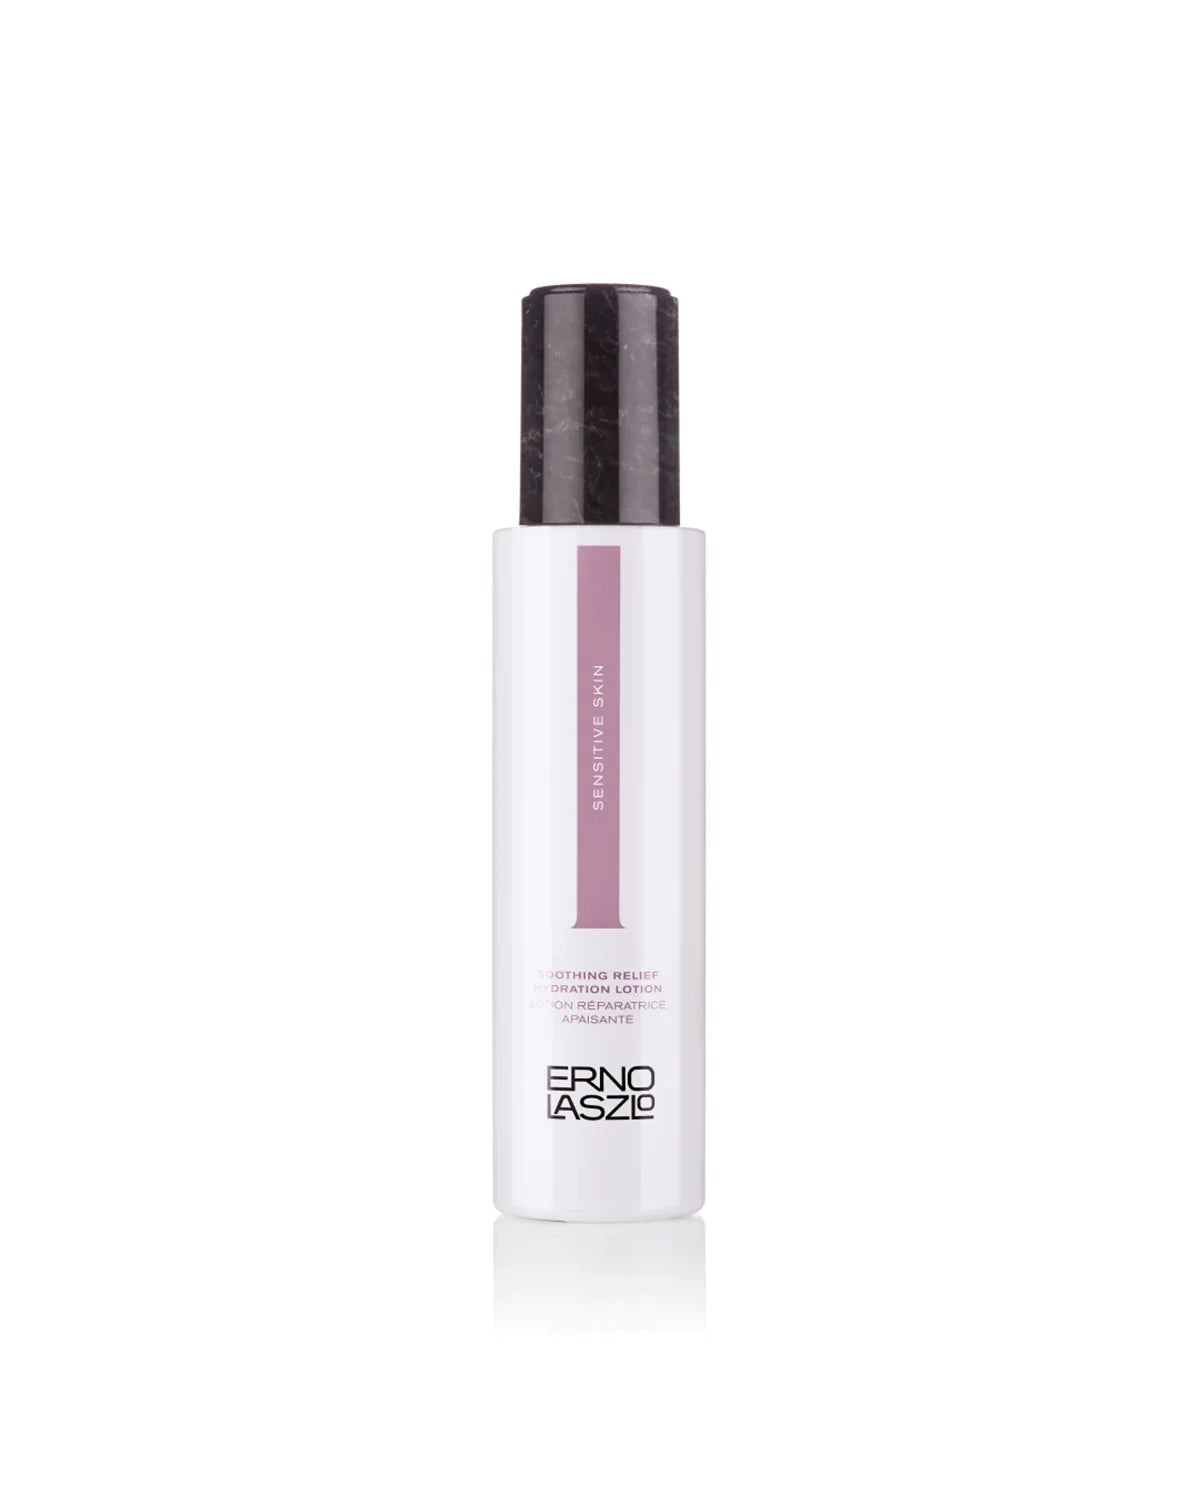 ERNO LASZLO - SOOTHING RELIEF HYDRATION LOTION